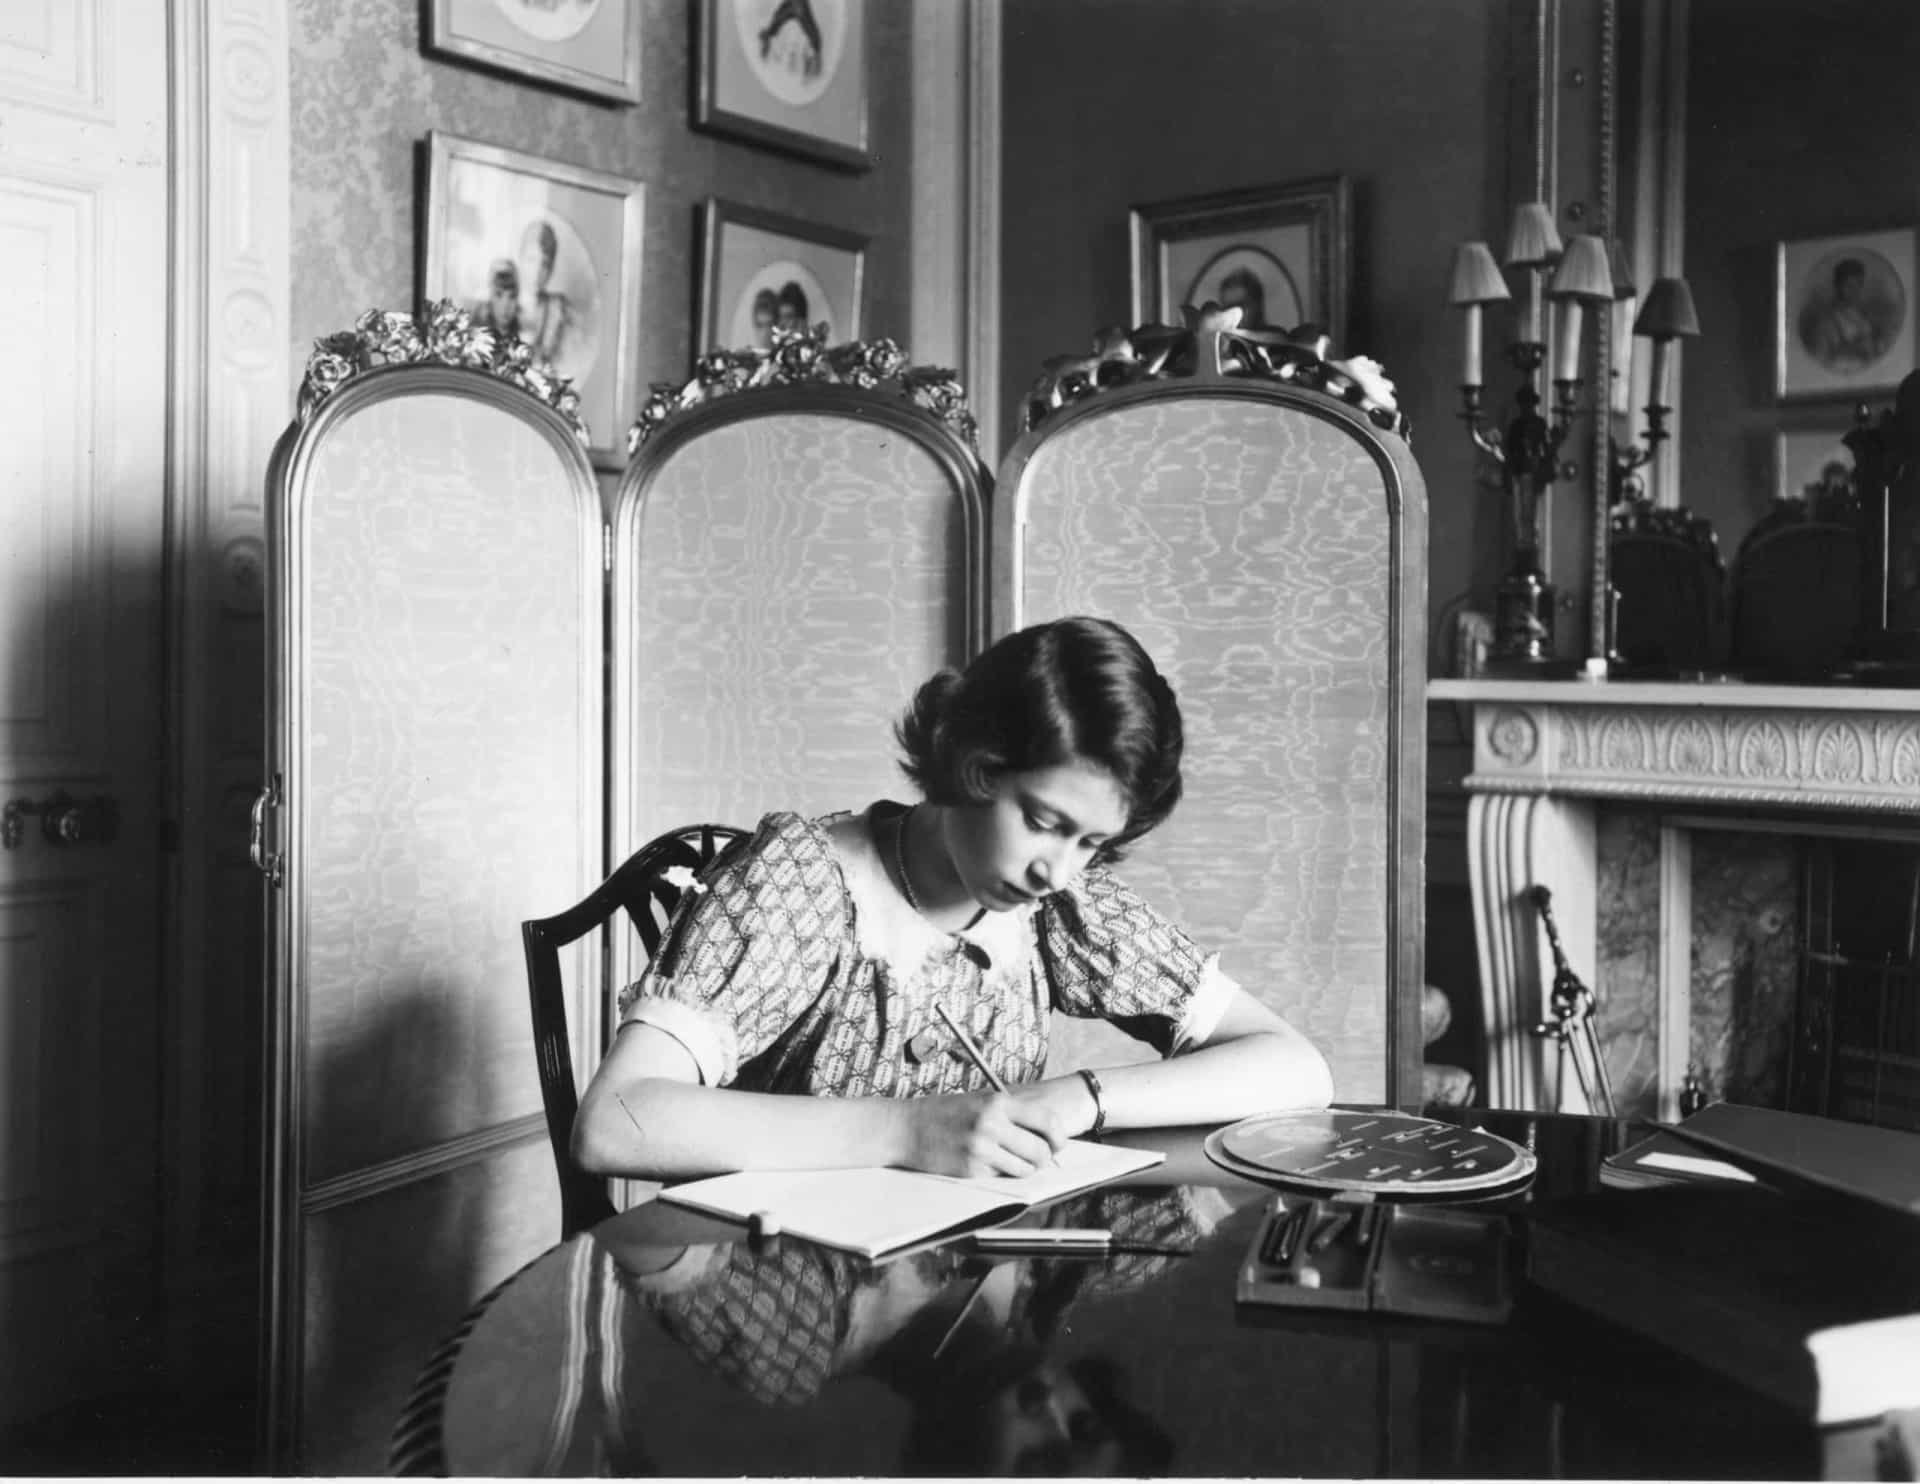 <p>Princess Elizabeth, the future <a href="https://www.starsinsider.com/celebrity/504721/30-things-the-queen-can-do-that-you-cant" rel="noopener">Queen Elizabeth II</a>, concentrates on her studies at Buckingham Palace in England on June 22, 1940. Elizabeth and her sister Margaret were the last members of the royal family to be educated at home by tutors in the traditional manner.</p>